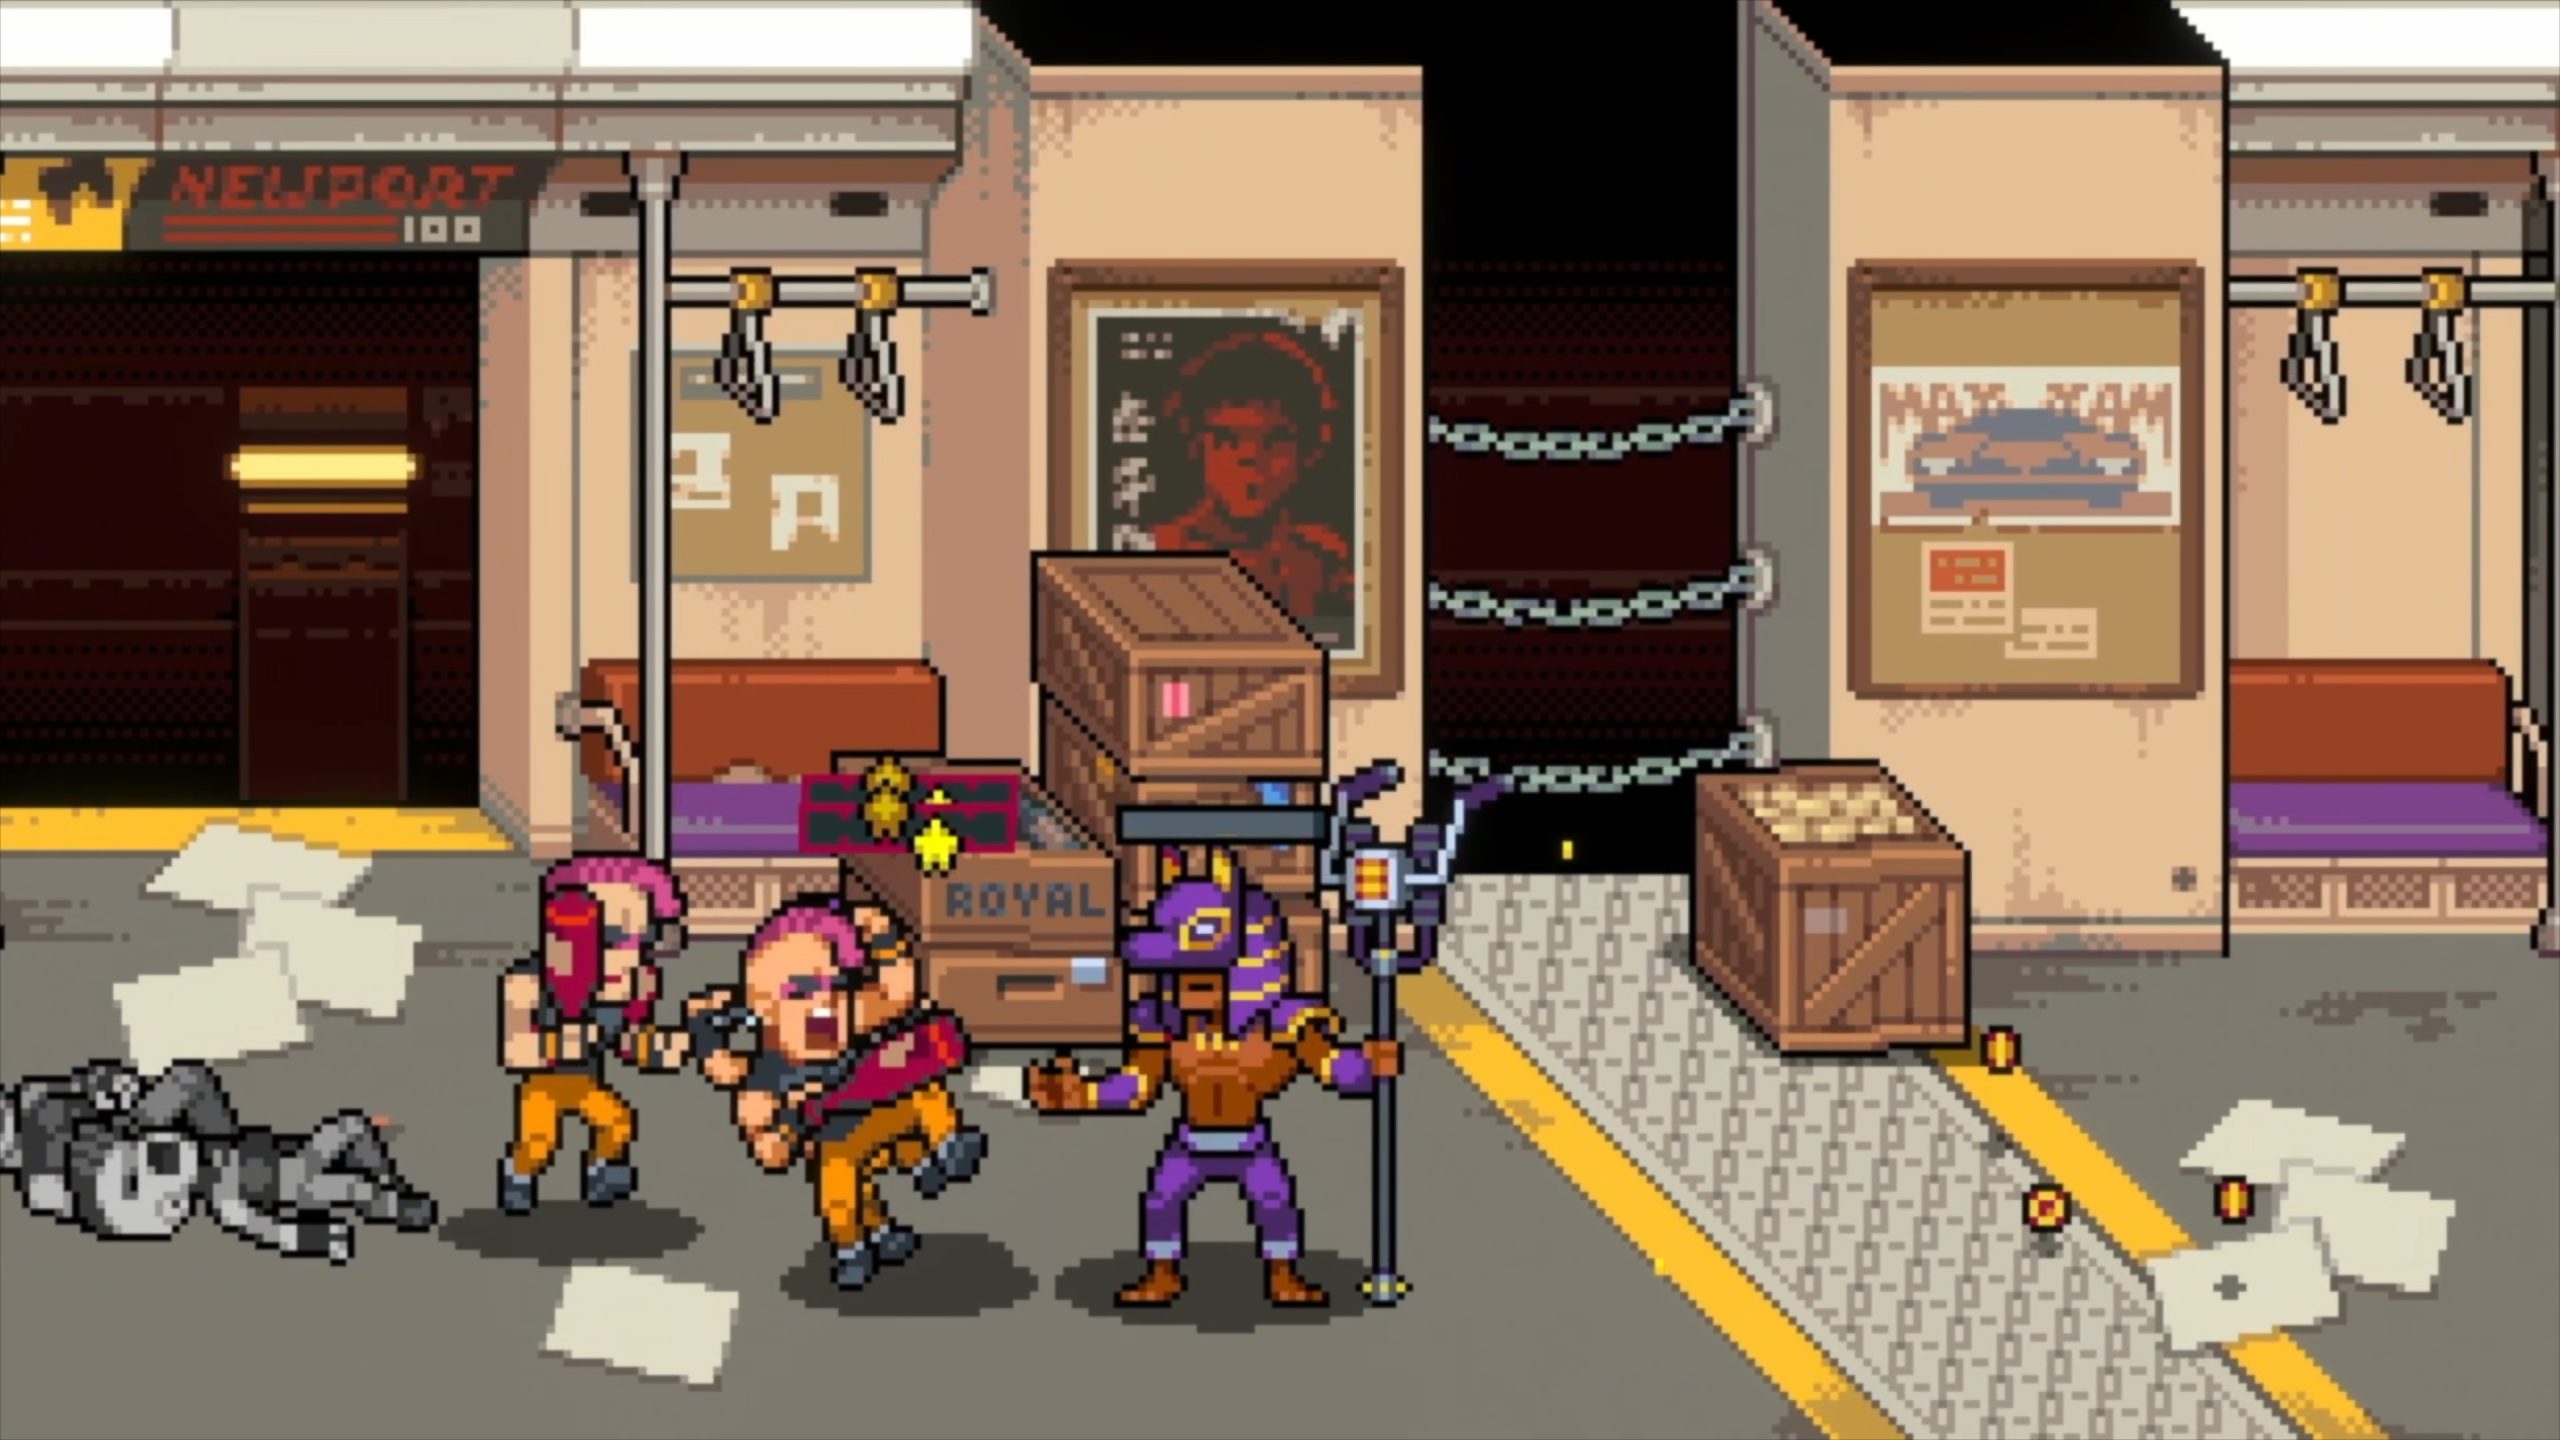 Double Dragon Gaiden: Rise of the Dragons Reviews - OpenCritic